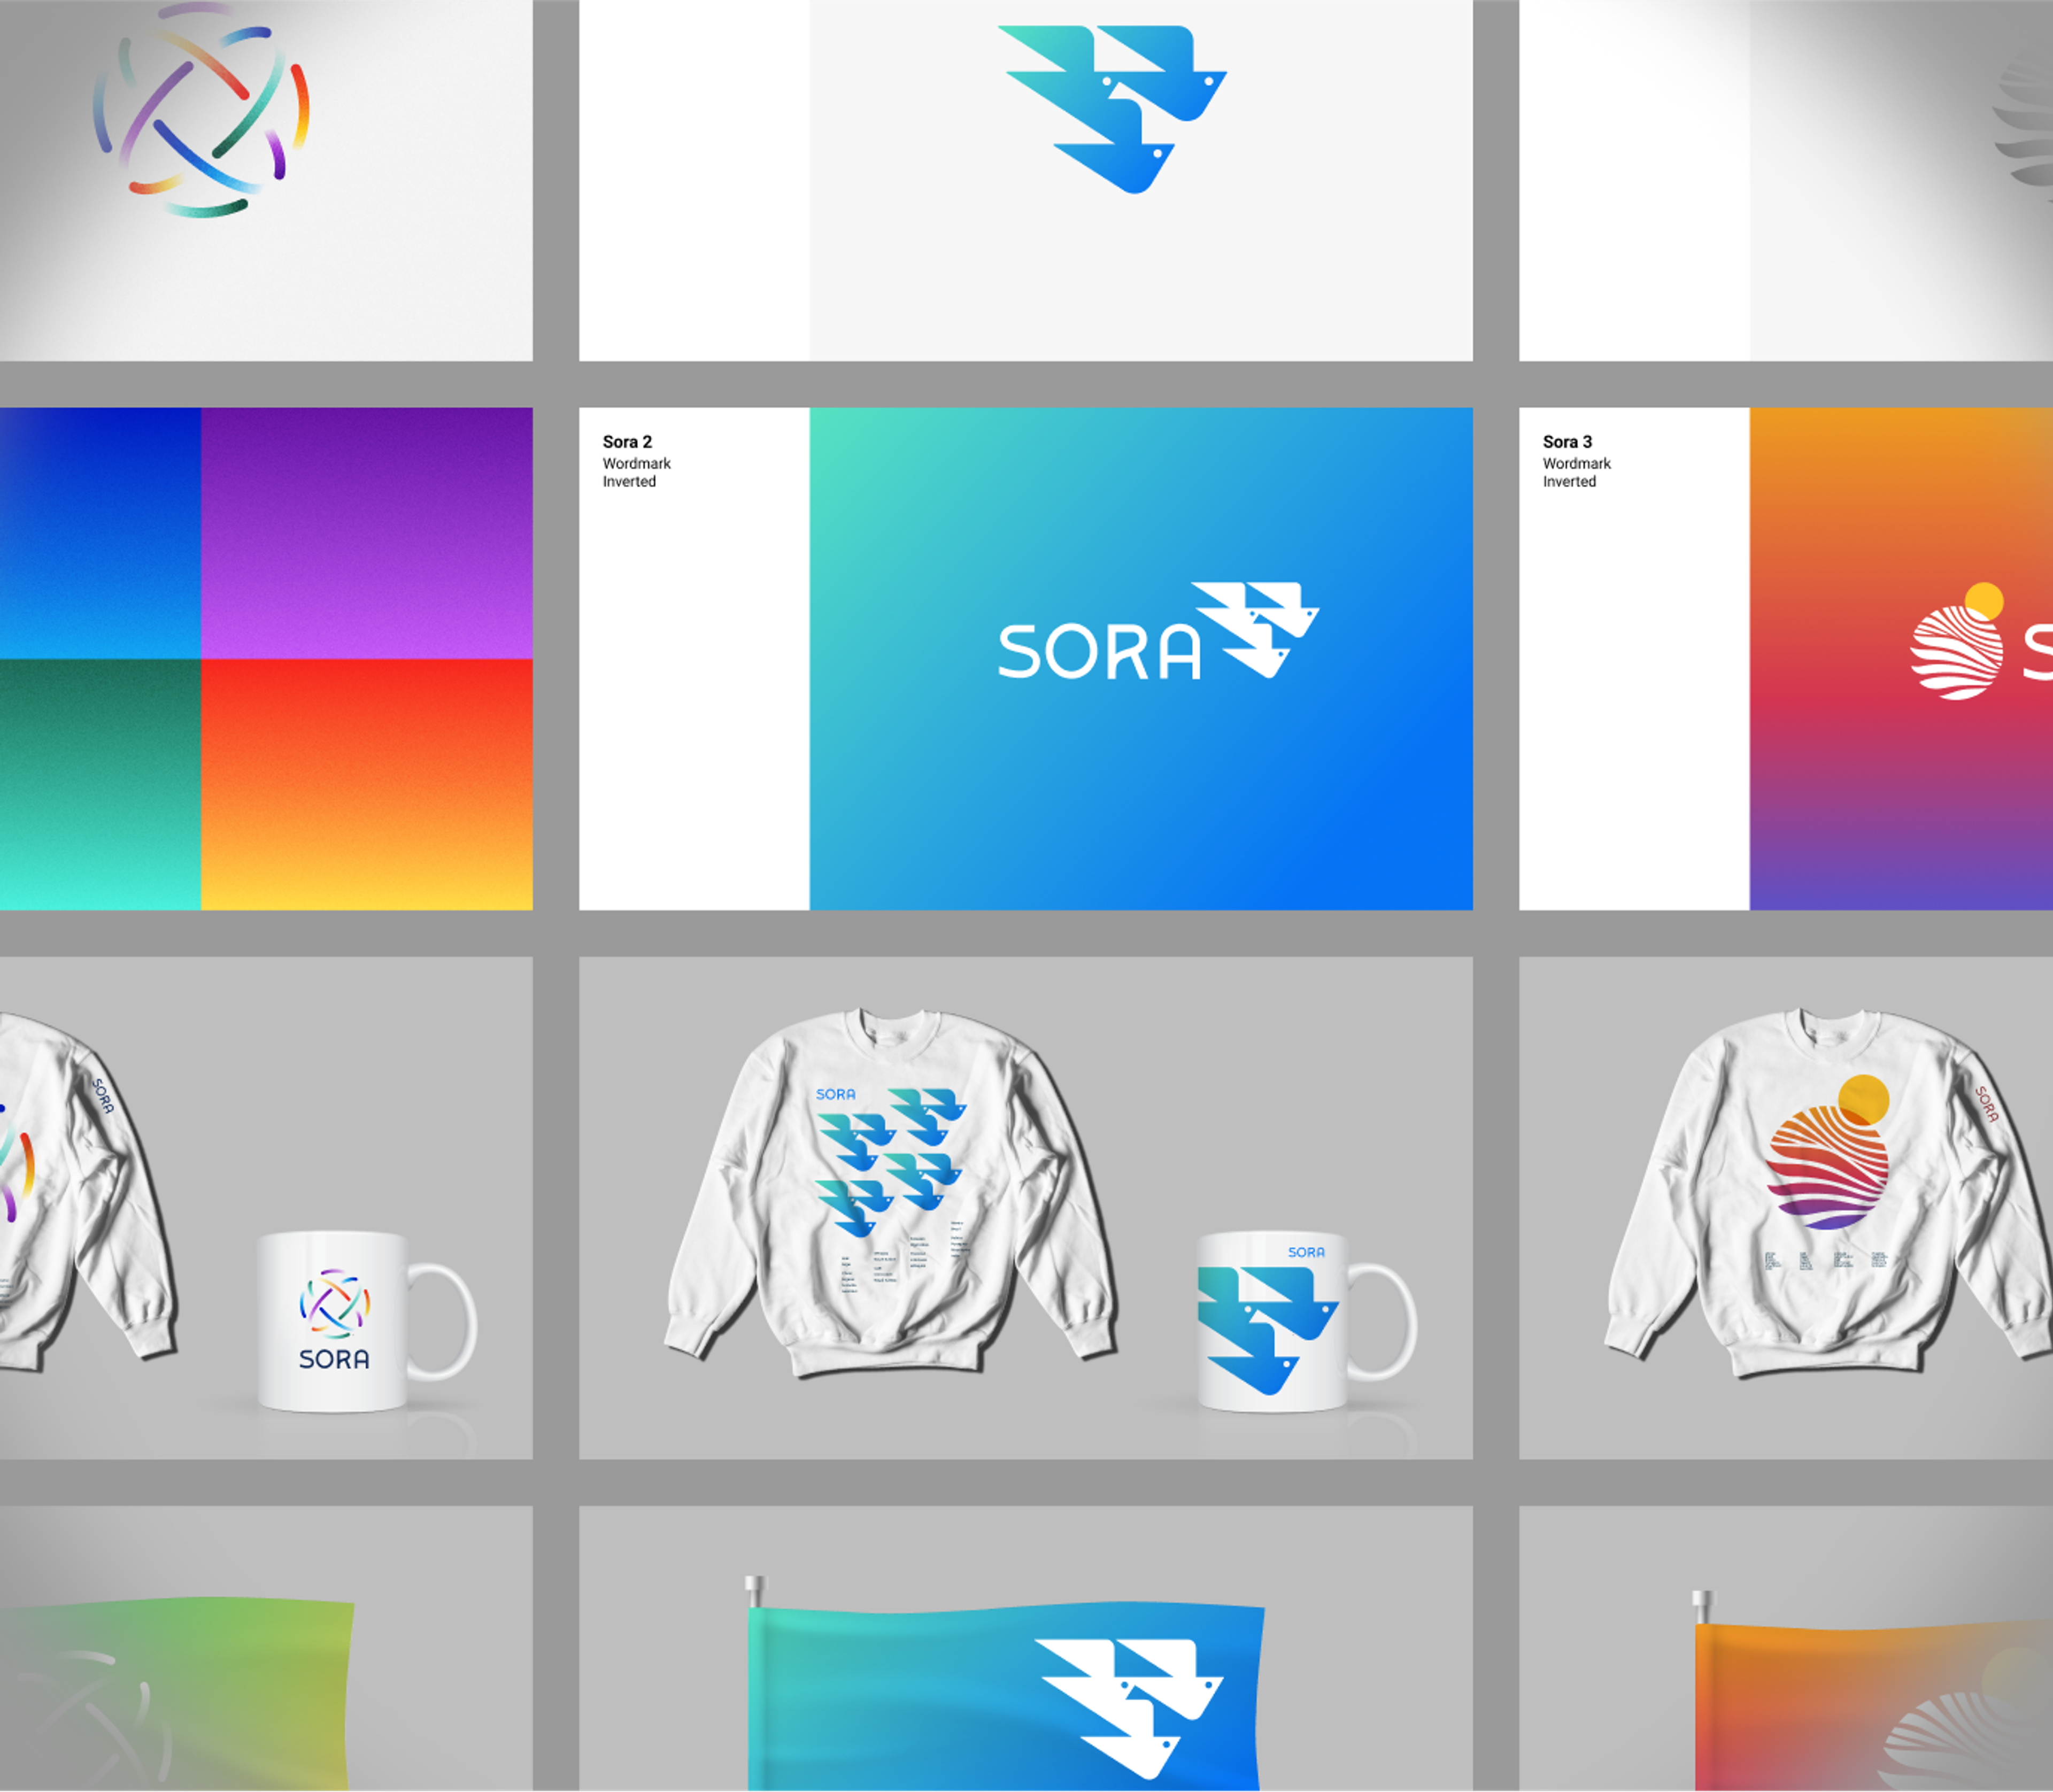 Exploration of logos with color gradients, shown on a plain background and on a sweatshirt, a mug, and a flag